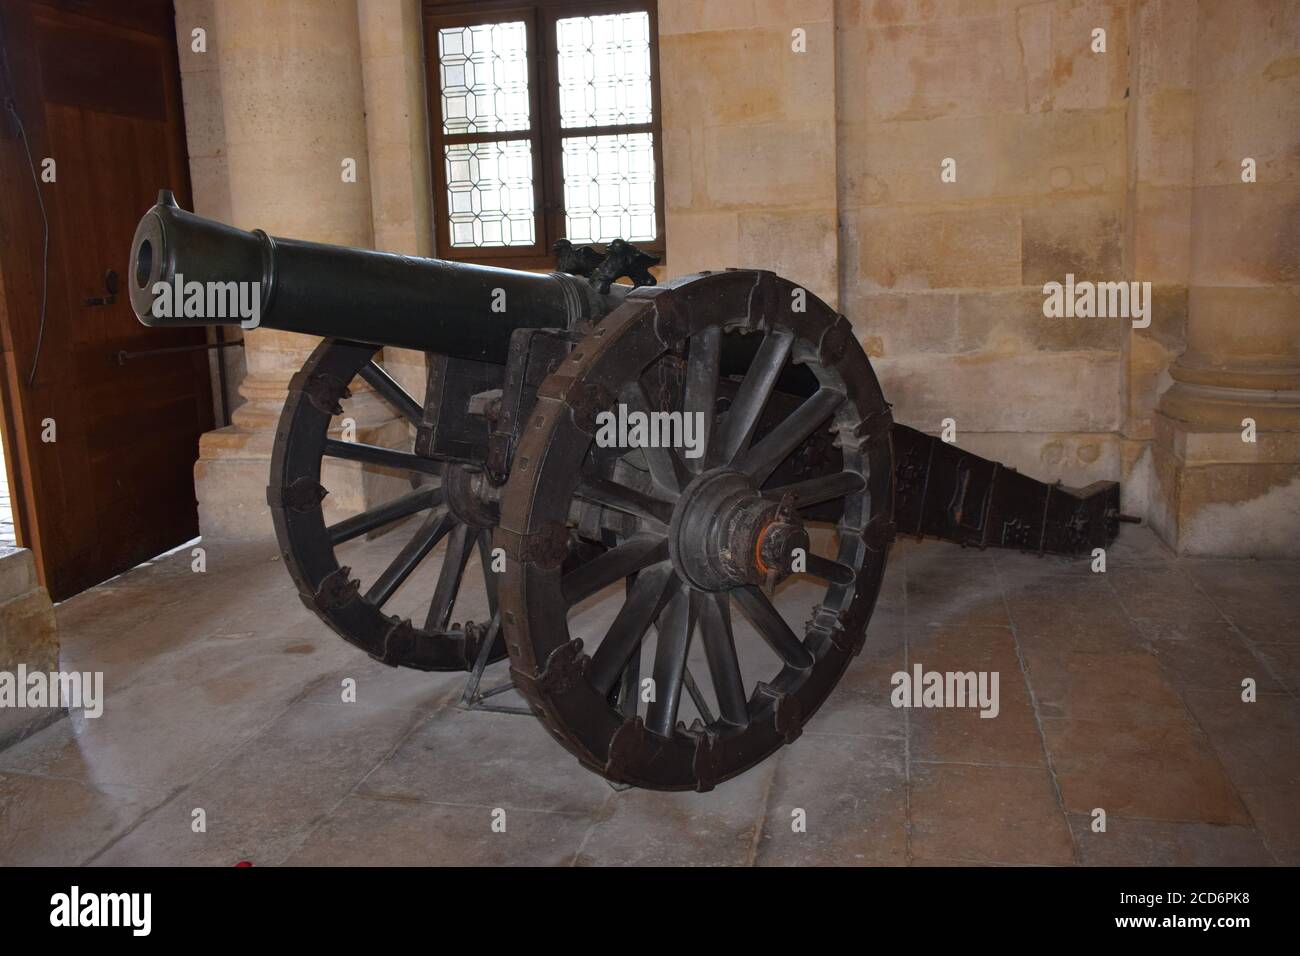 PARIS, FRANCE - May 1, 2018: Cannon inside the building of the Hotel des invalides in Paris. The National Residence of the Invalids and Army Museum Stock Photo